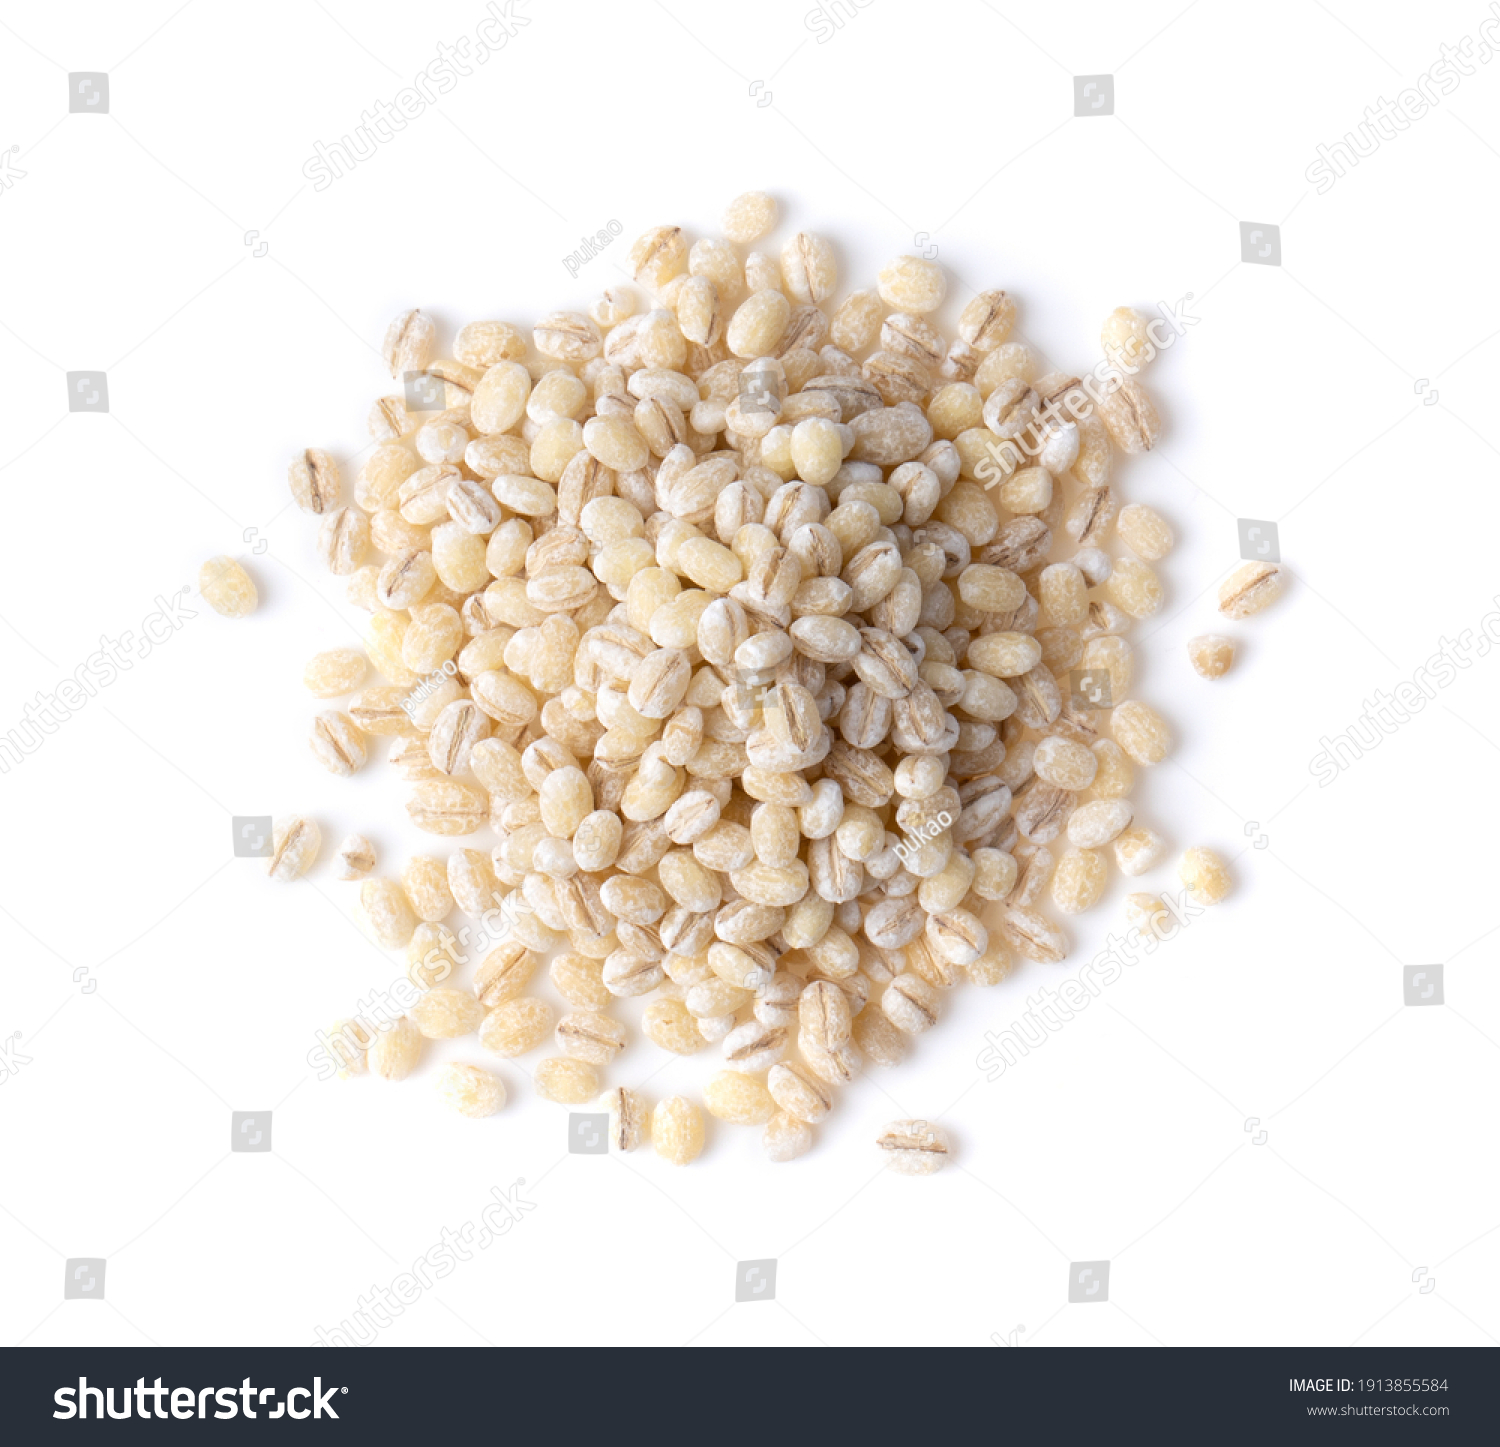 pile of pearl barley isolated on white background #1913855584